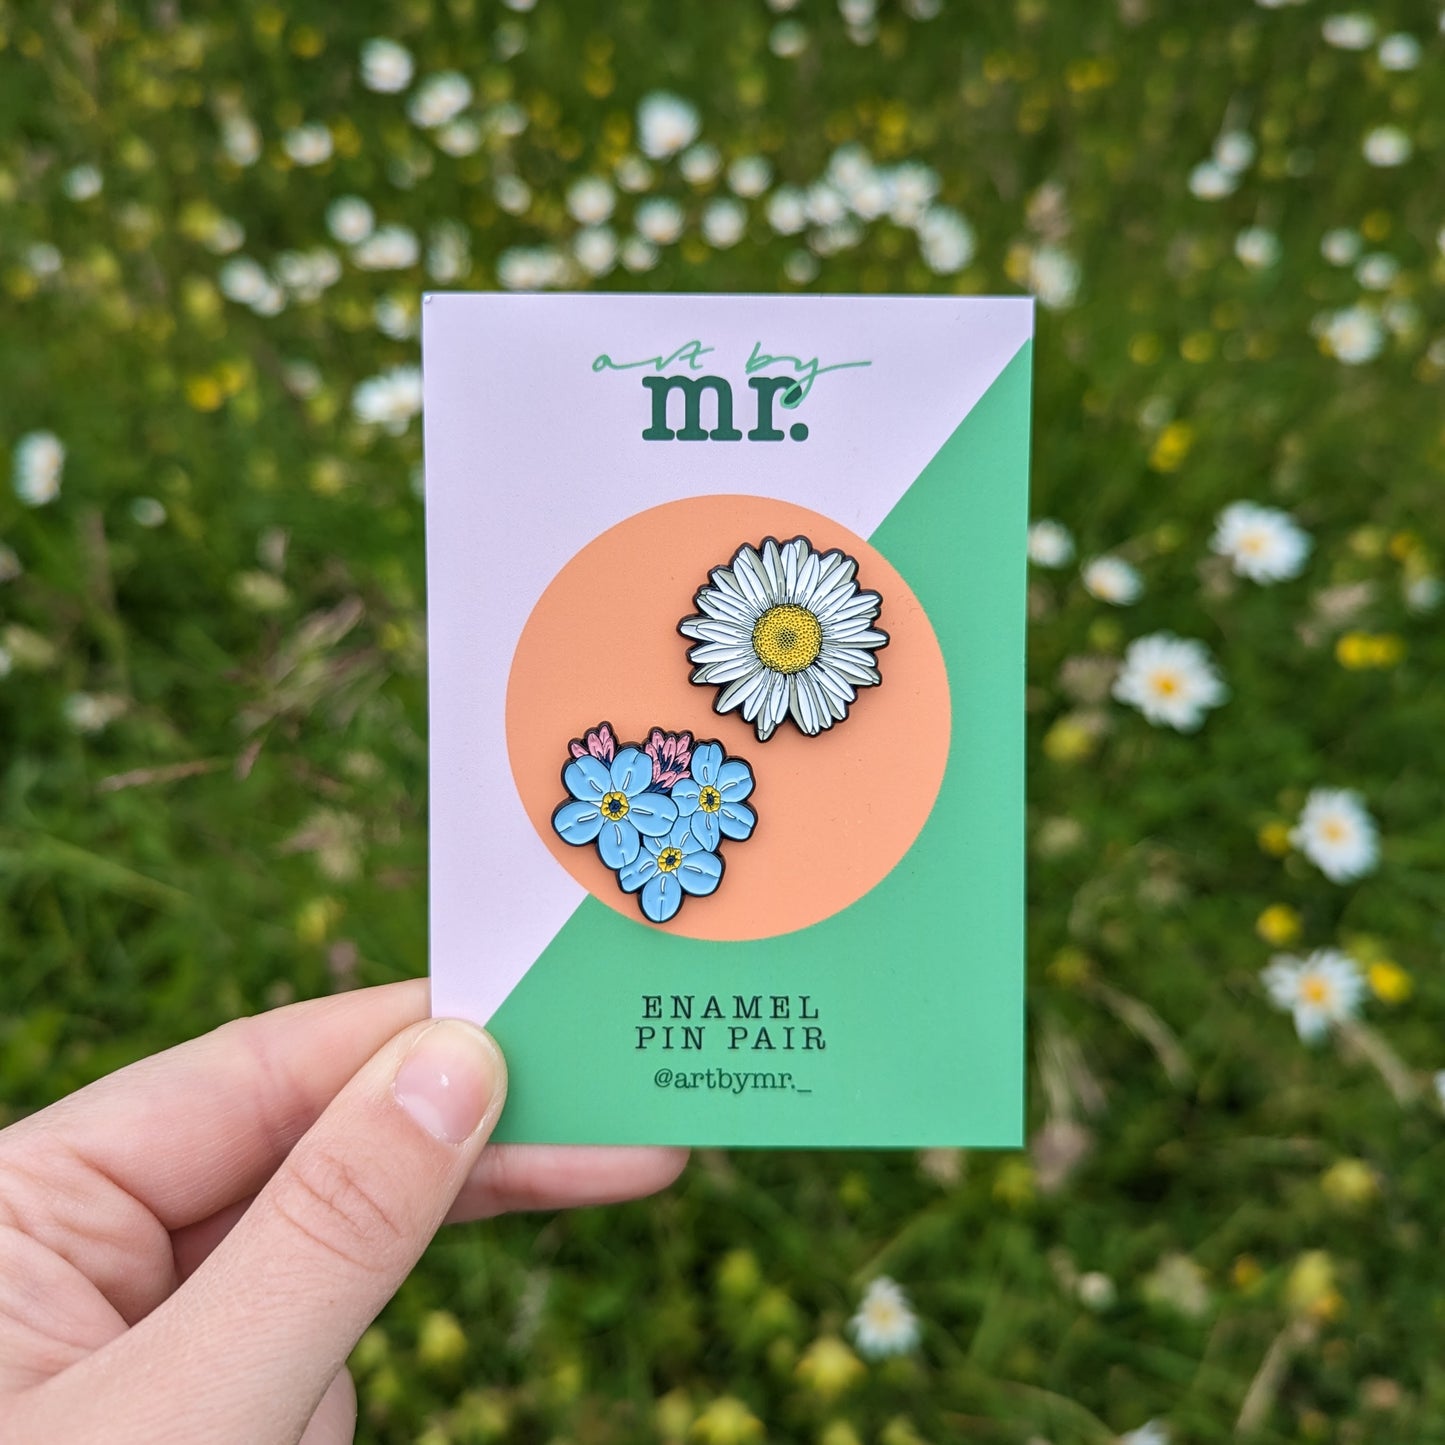 Forget-me-not Pin